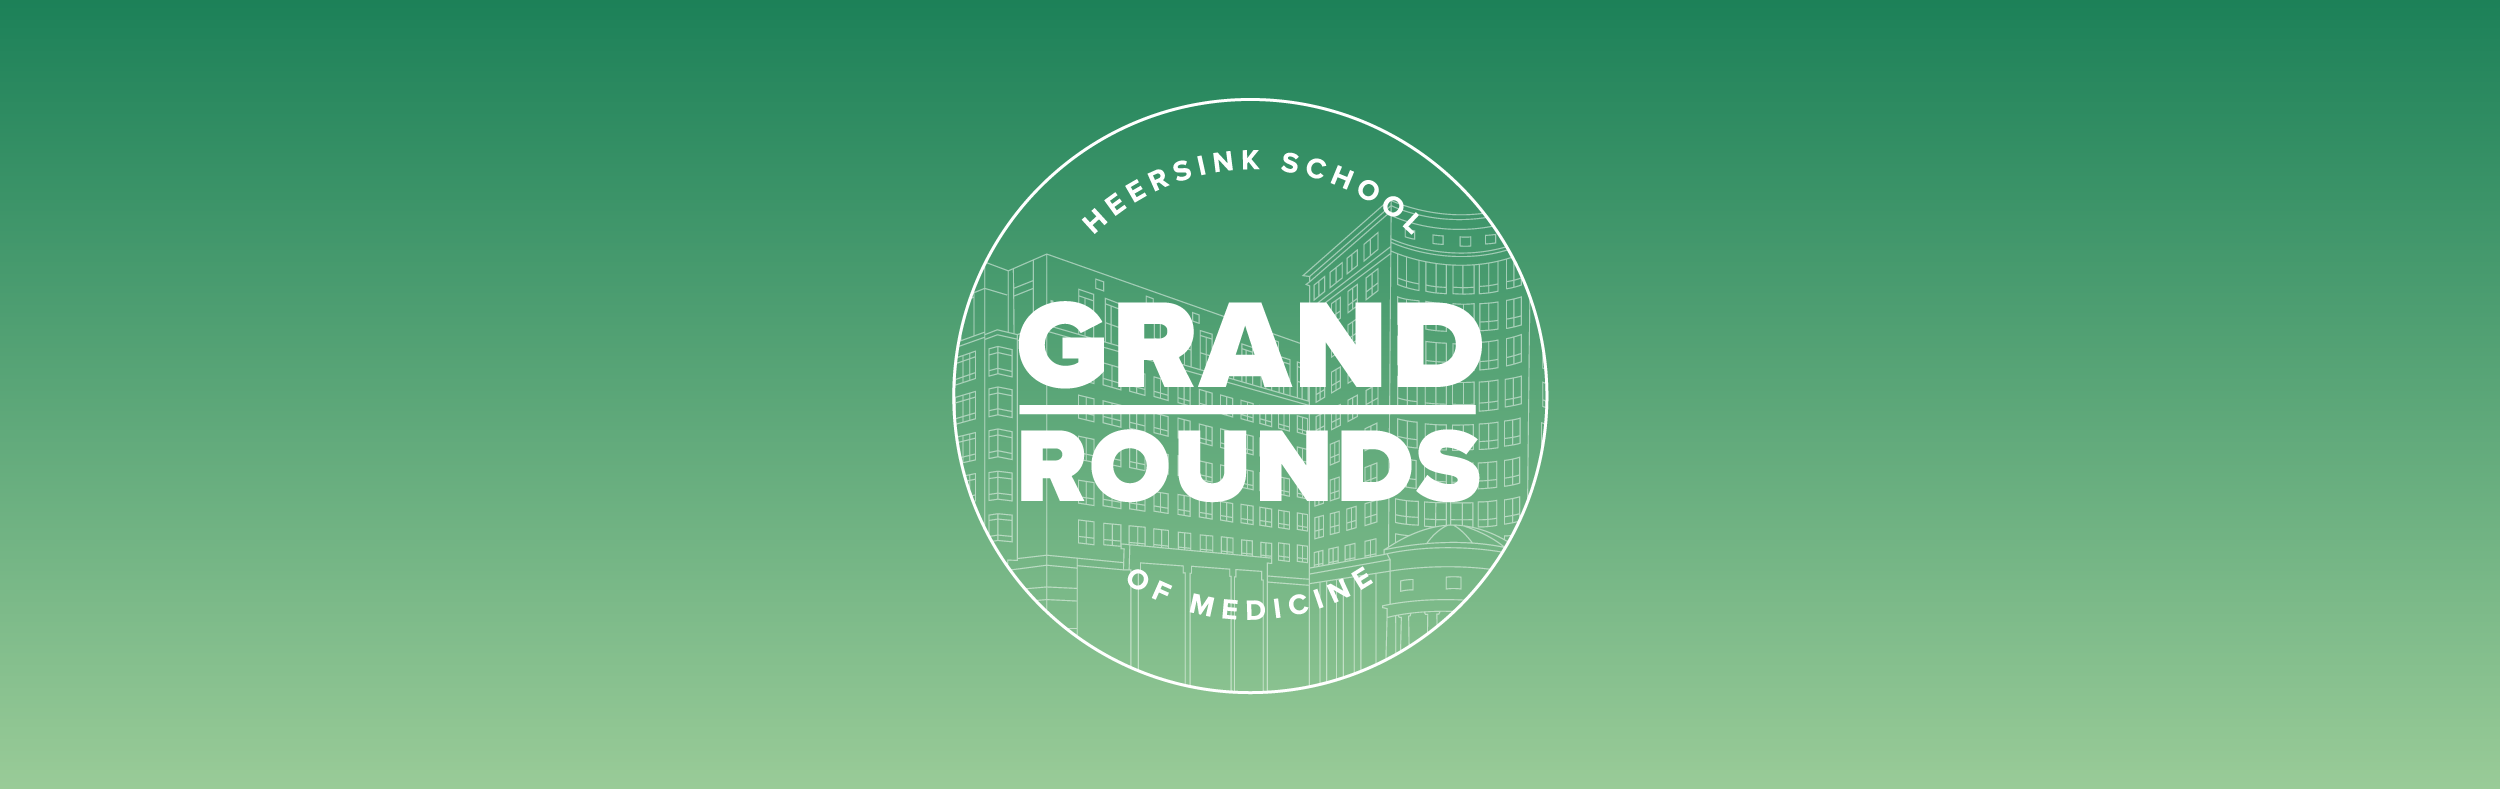 grand rounds banner web